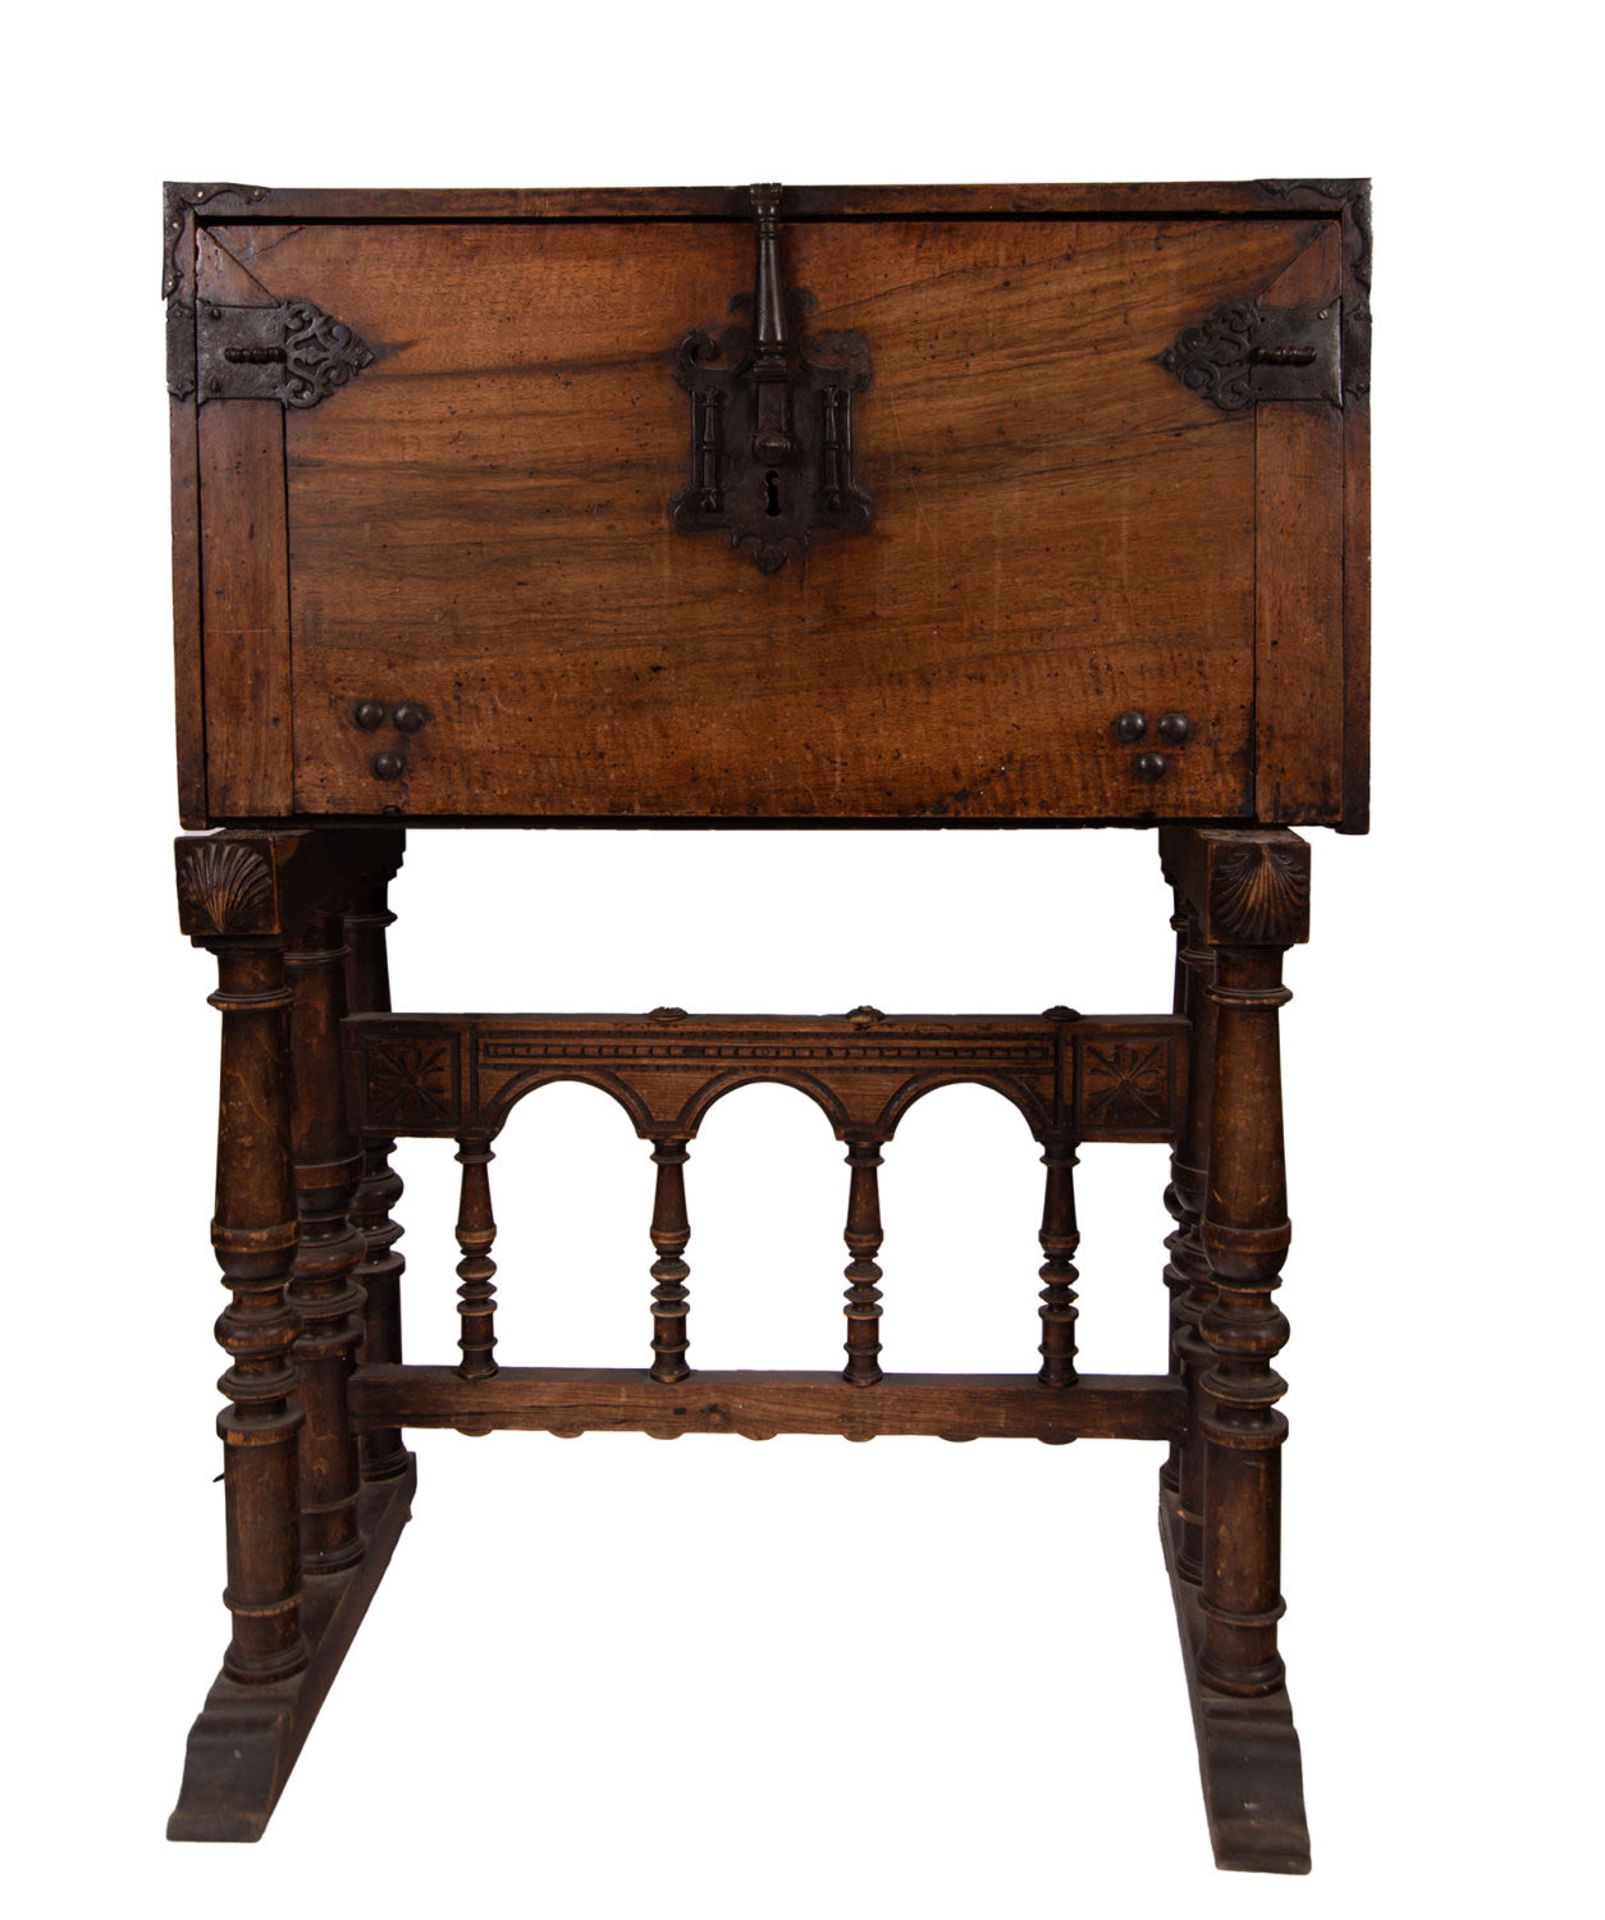 Important Spanish-Flemish cabinet, in bone and marquetry, 17th century